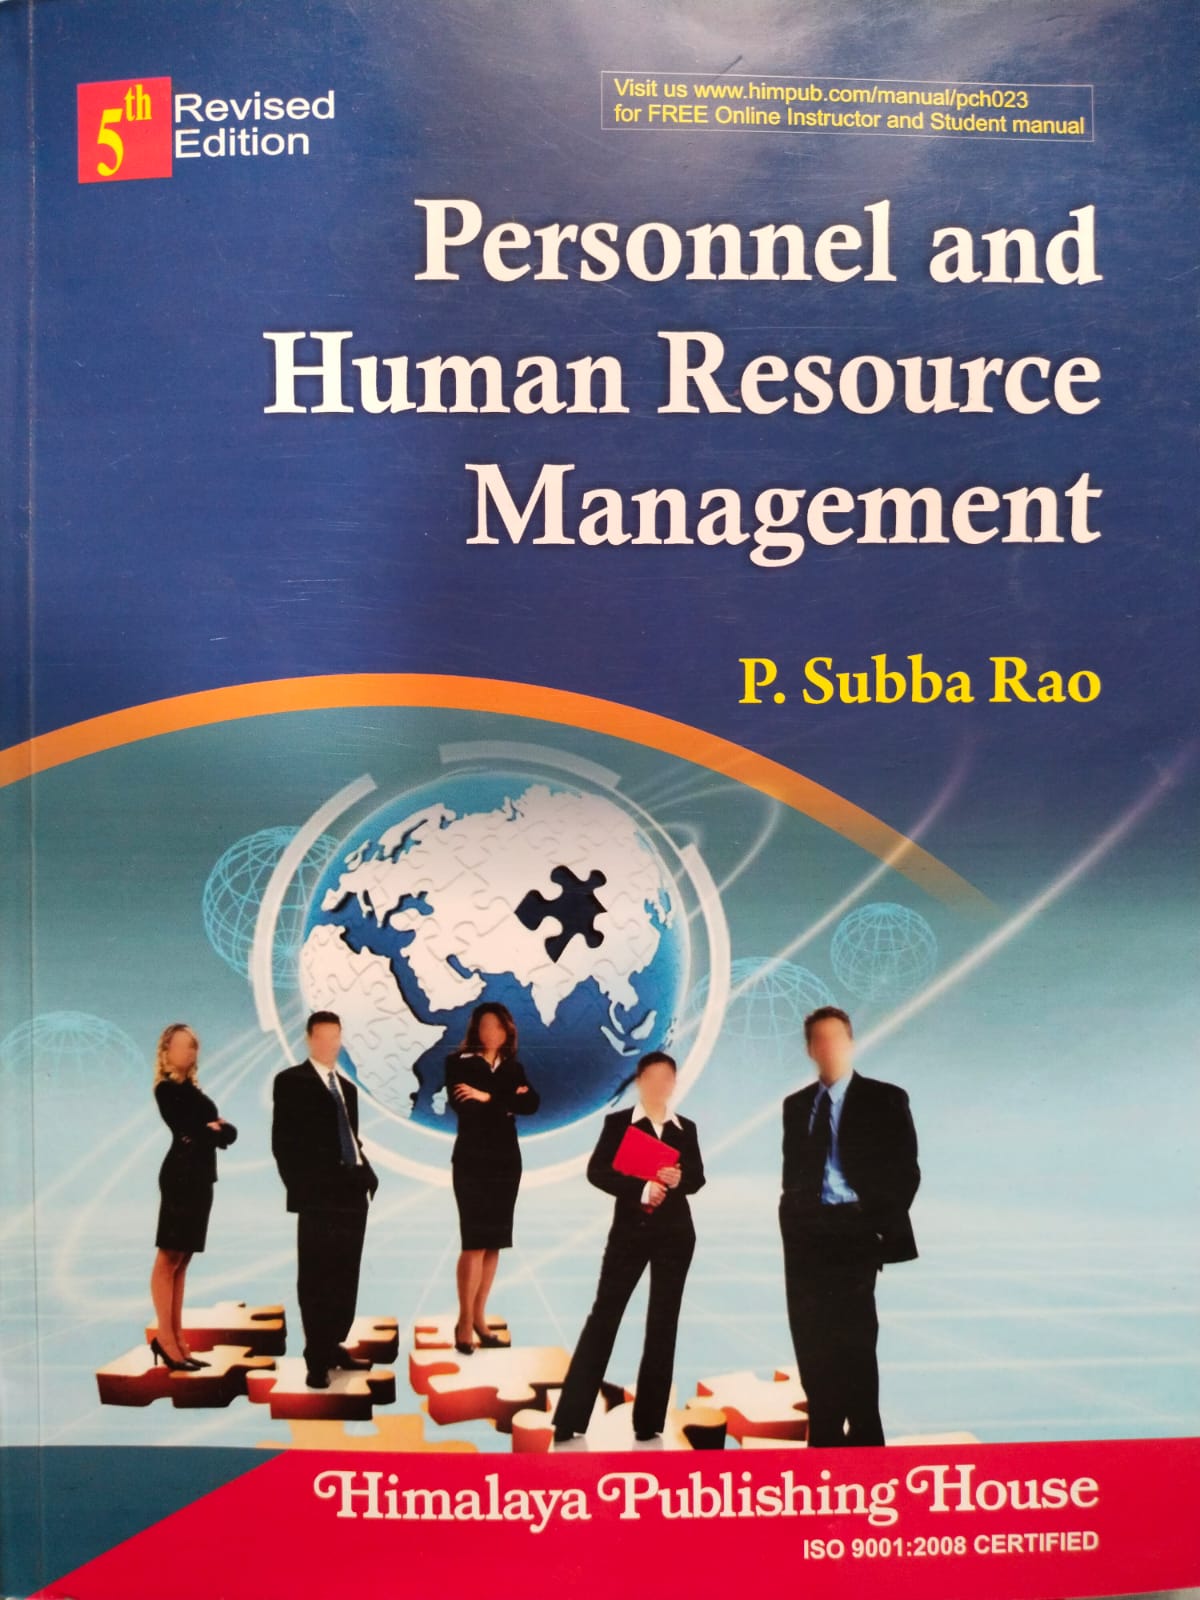 Personnel and Human Resource Management by P.Subba Rao